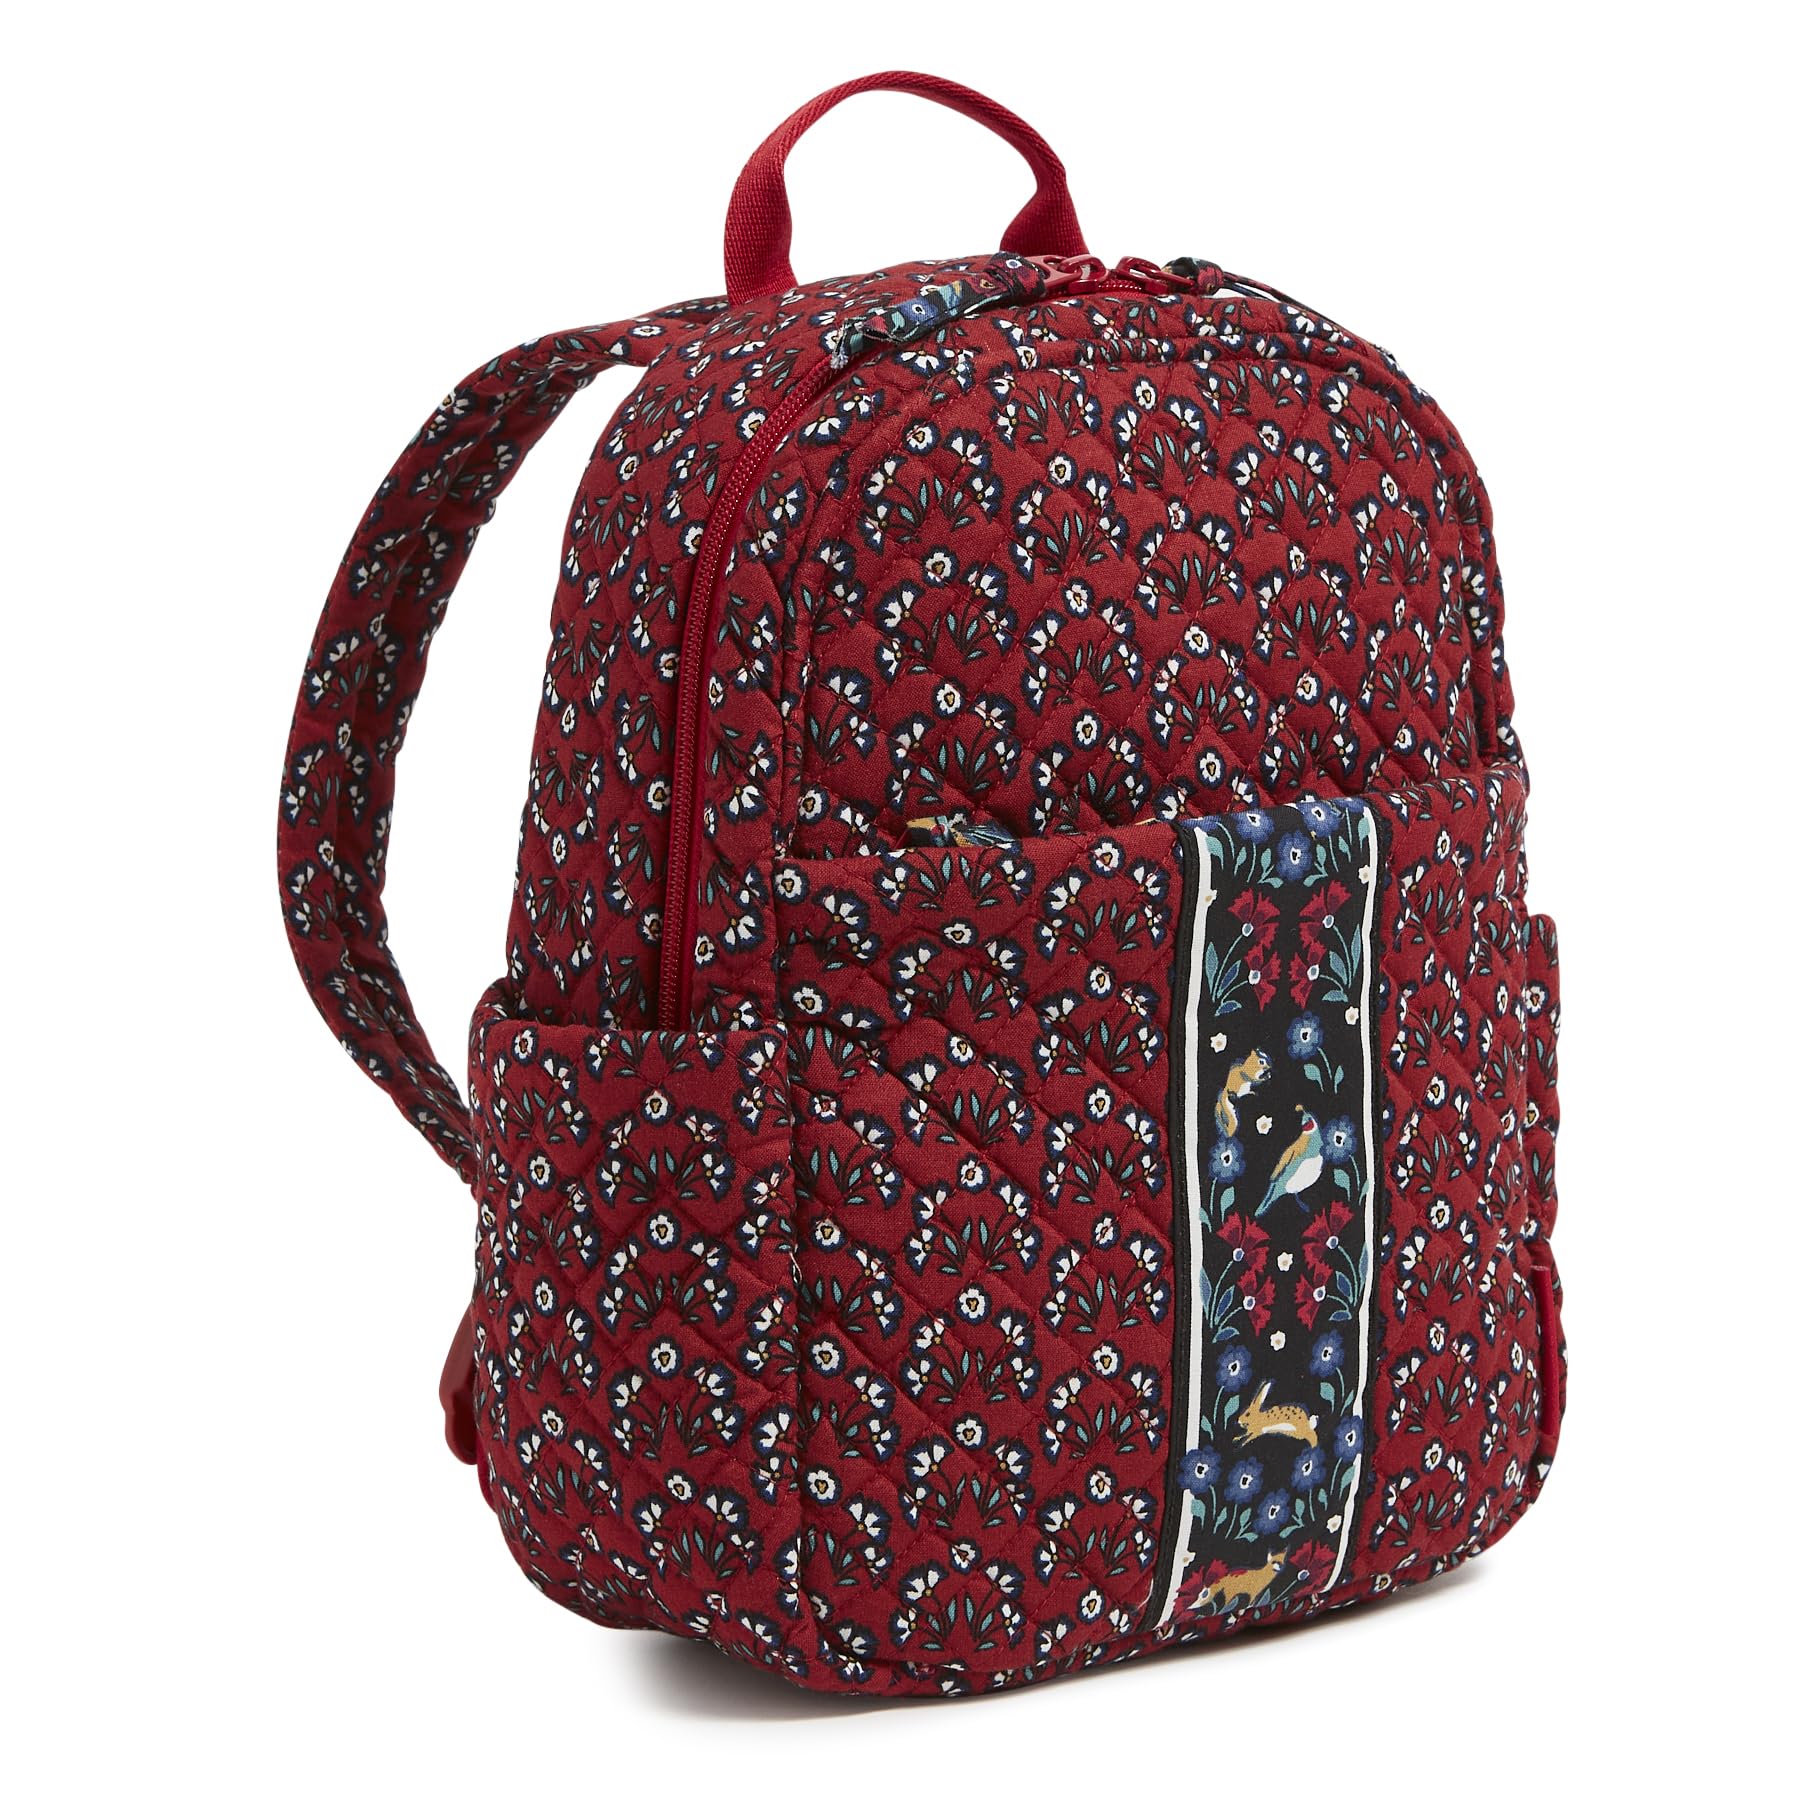 Vera Bradley Women's Cotton Small Backpack, Enchanting Flowers, One Size